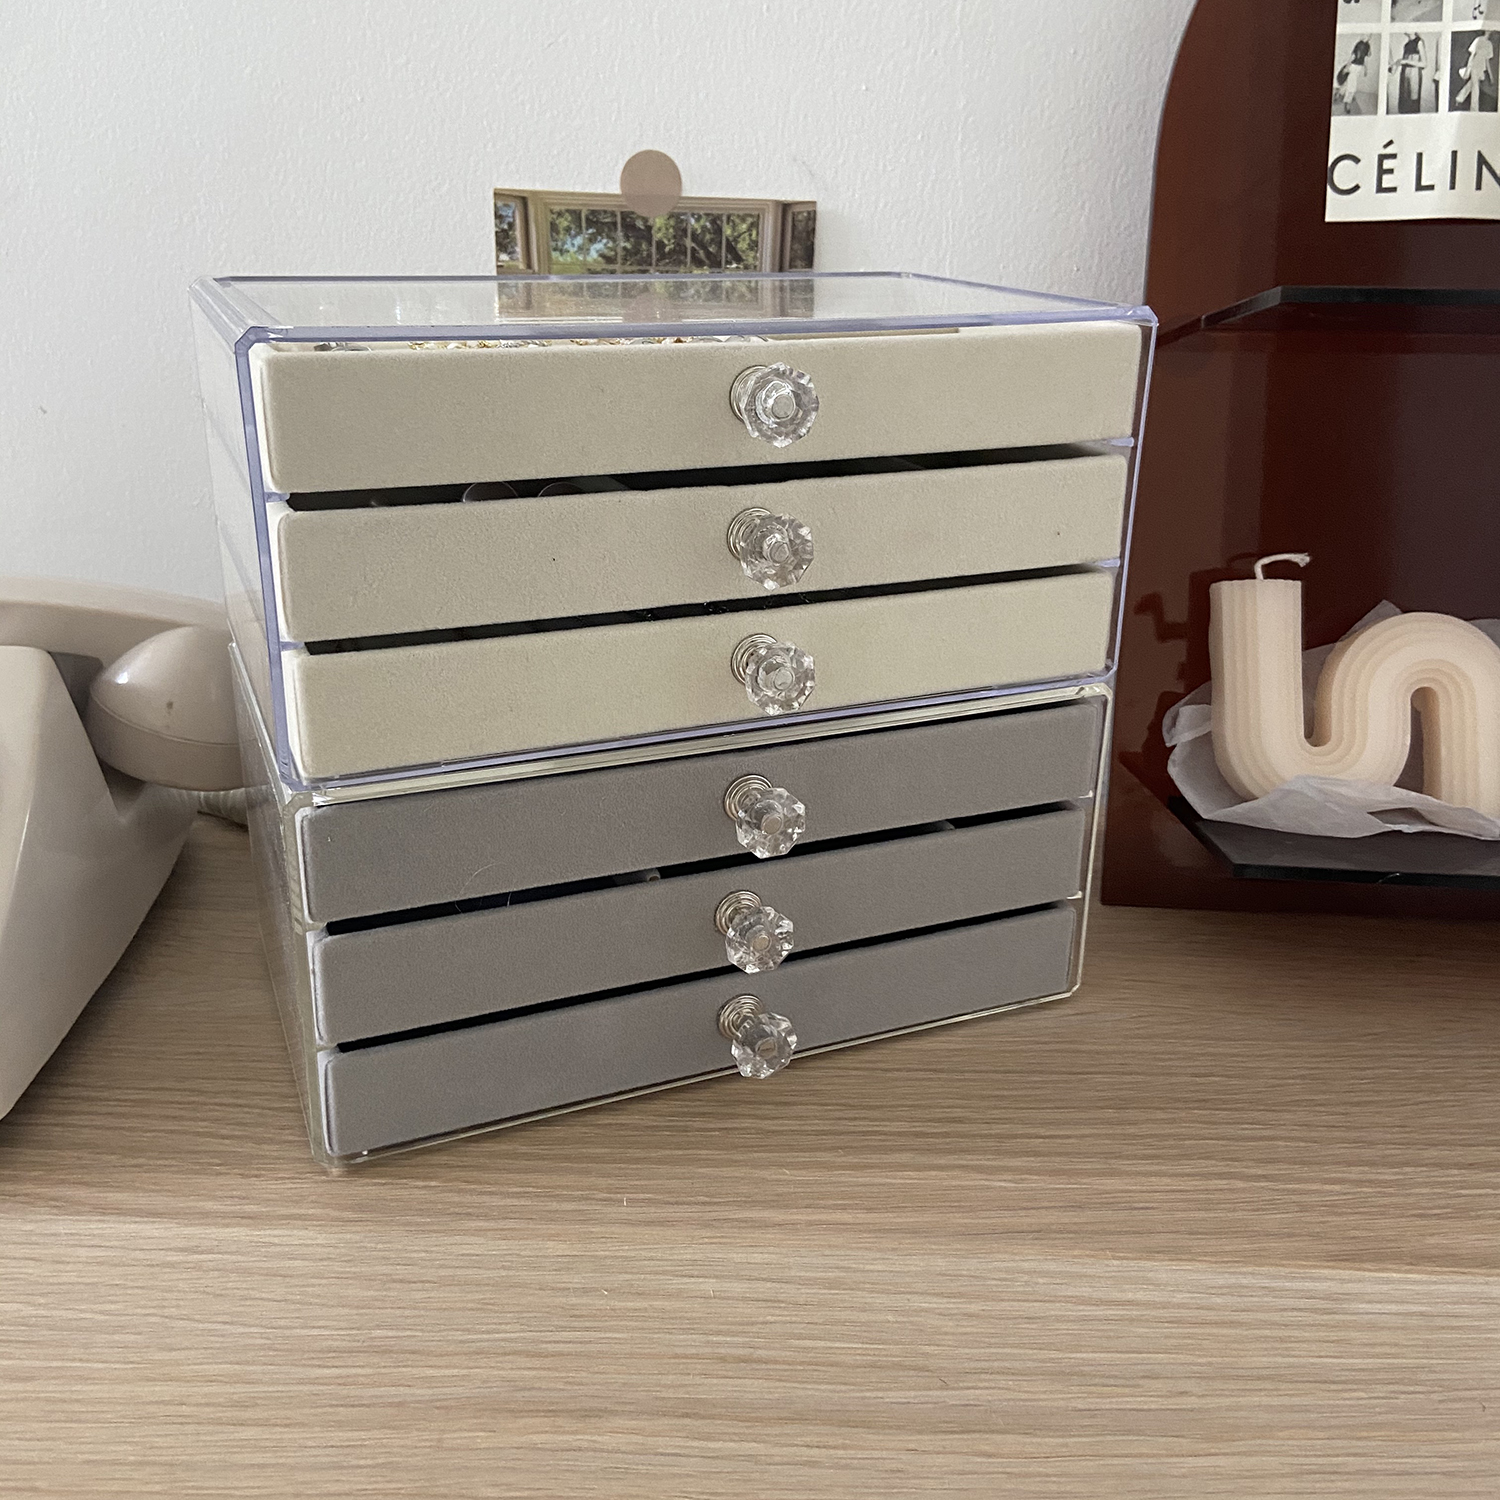 Velvet Drawer with Cosmetic Box Acrylic Drawer Jewelry Storage Box for Women Earrings Necklace Ring Charms Holder